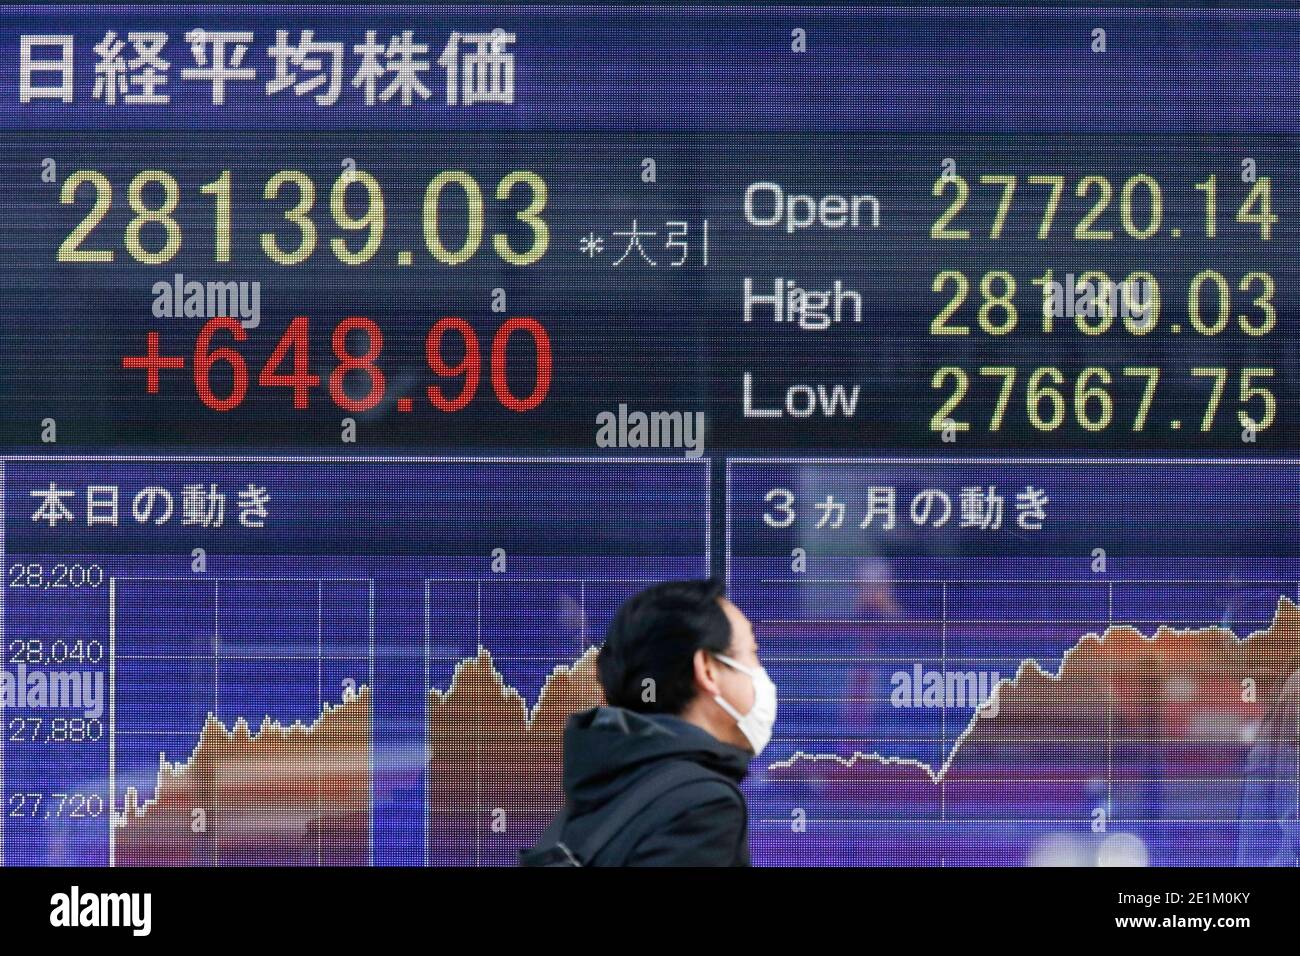 January 08, 2021, Tokyo, Japan - A man wearing a face mask walks past an electronic stock board showing Japan's Nikkei Stock Average, which rose 648.90 points or 2.36 percent to close at 28,139.03. Japan's Nikkei index rose 2.36% to hit a new 5-year high. Credit: Rodrigo Reyes Marin/Alamy Live News Stock Photo